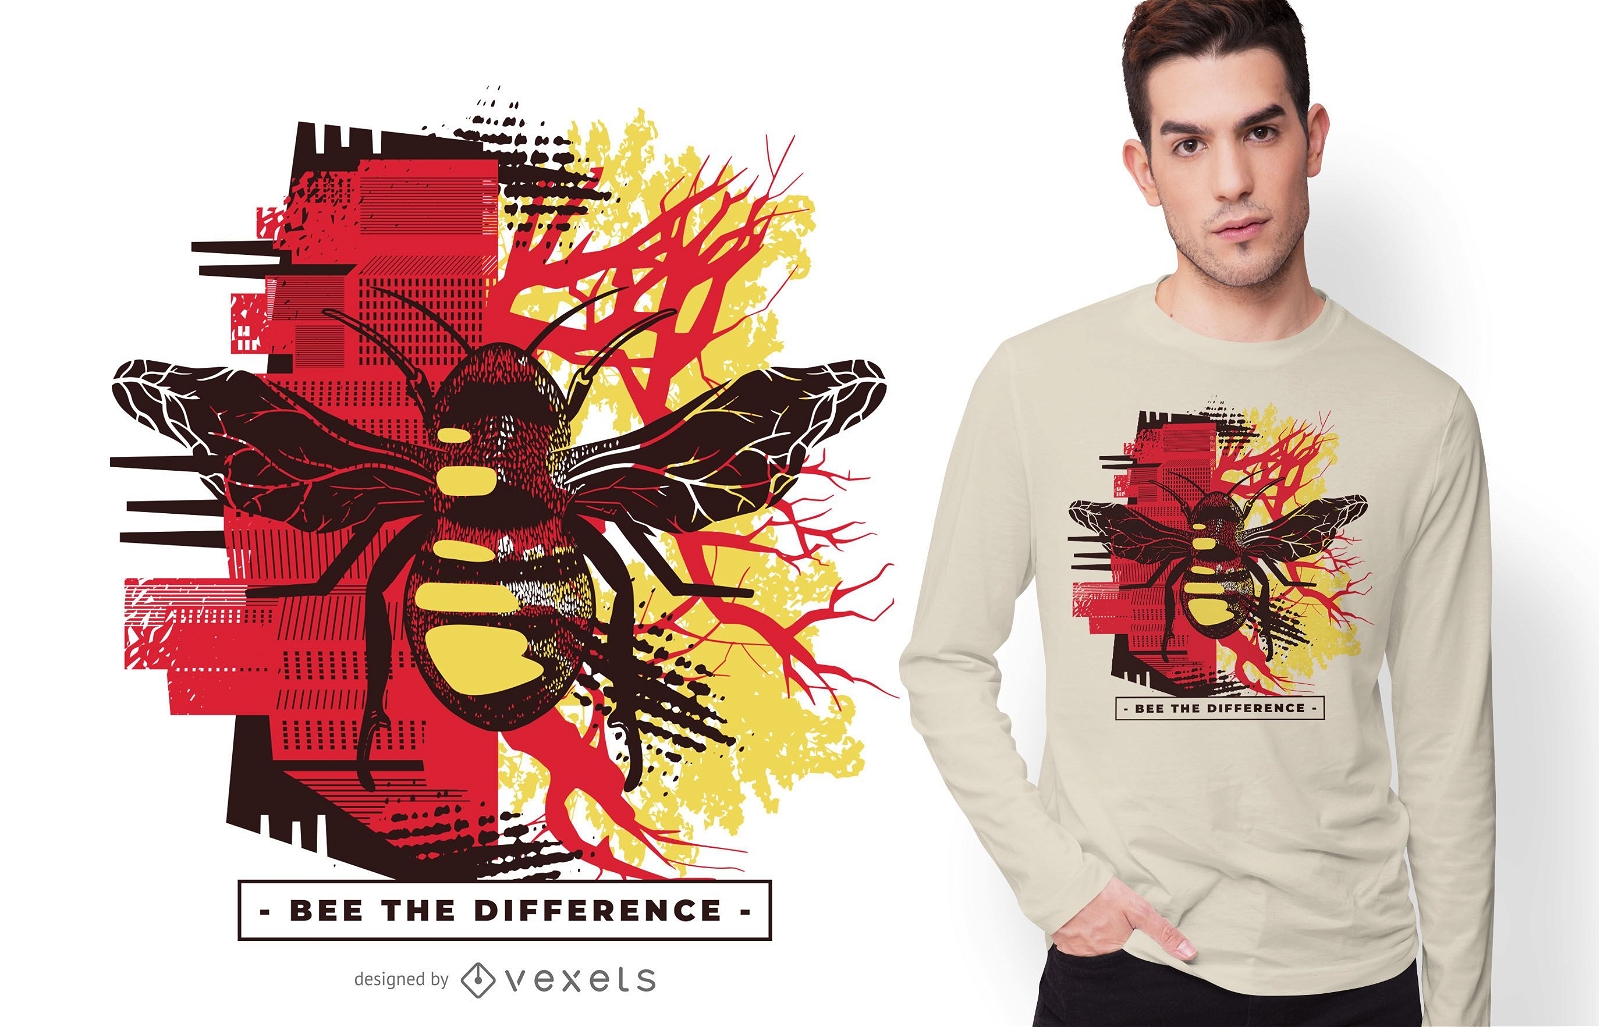 Bee the difference quote t-shirt design